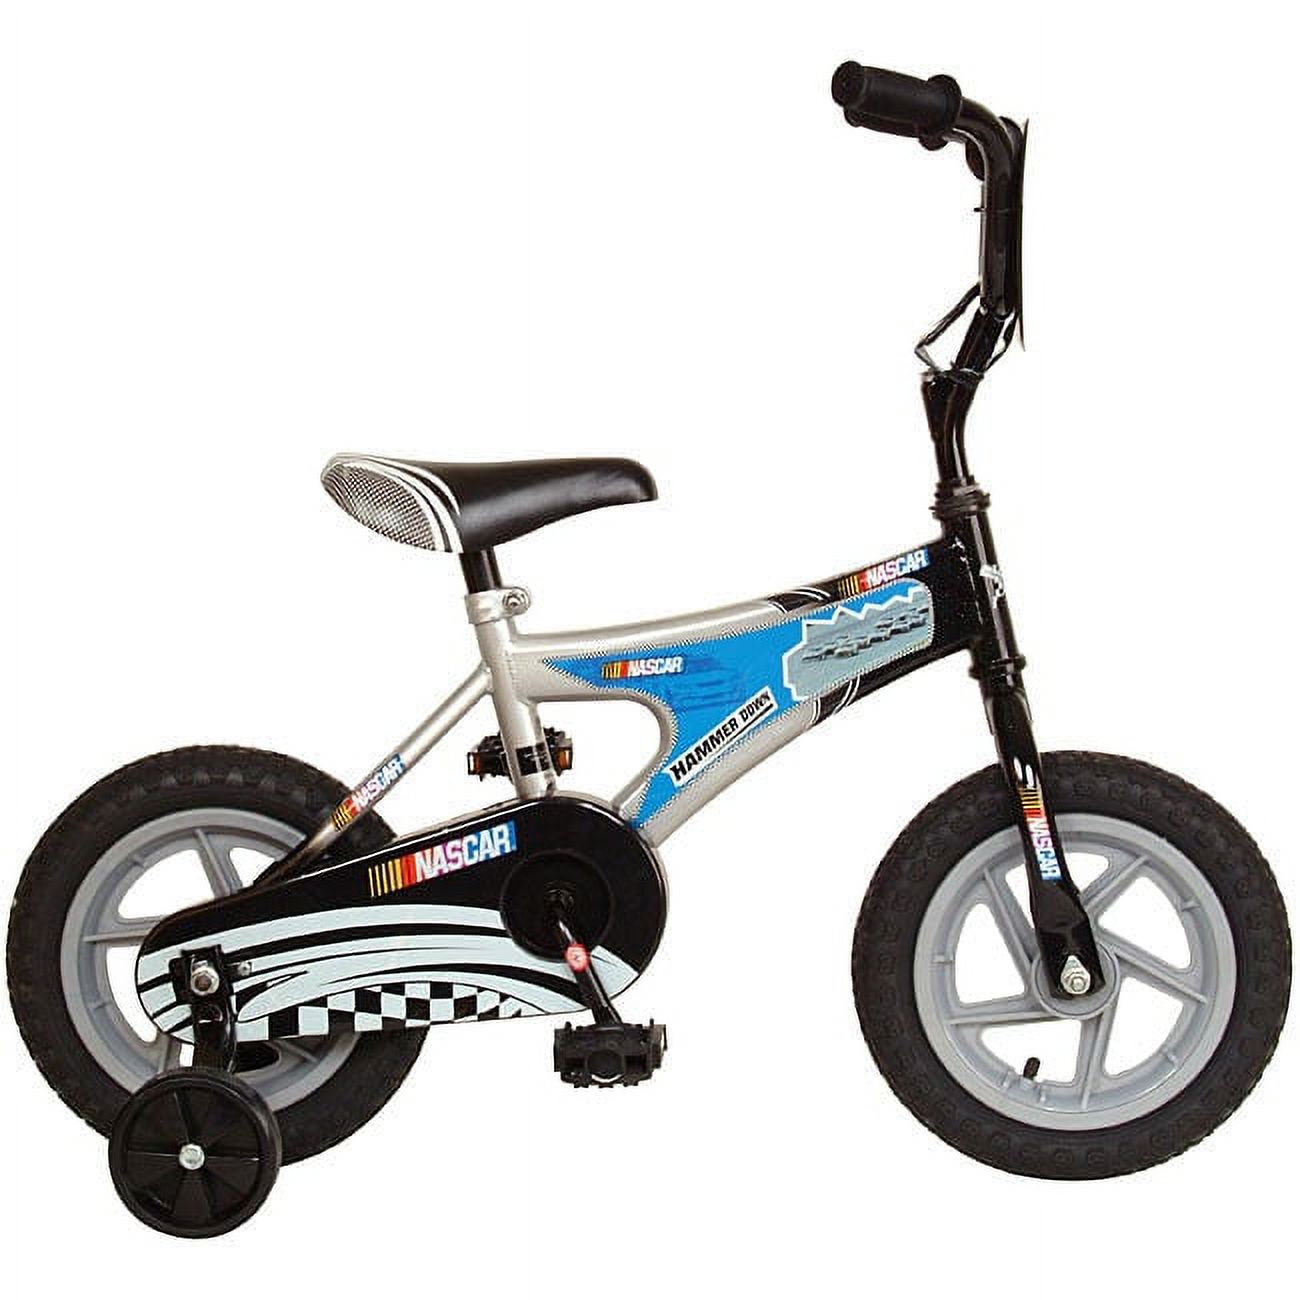 NASCAR  Hammer Down 12-inch Bicycle - image 1 of 2